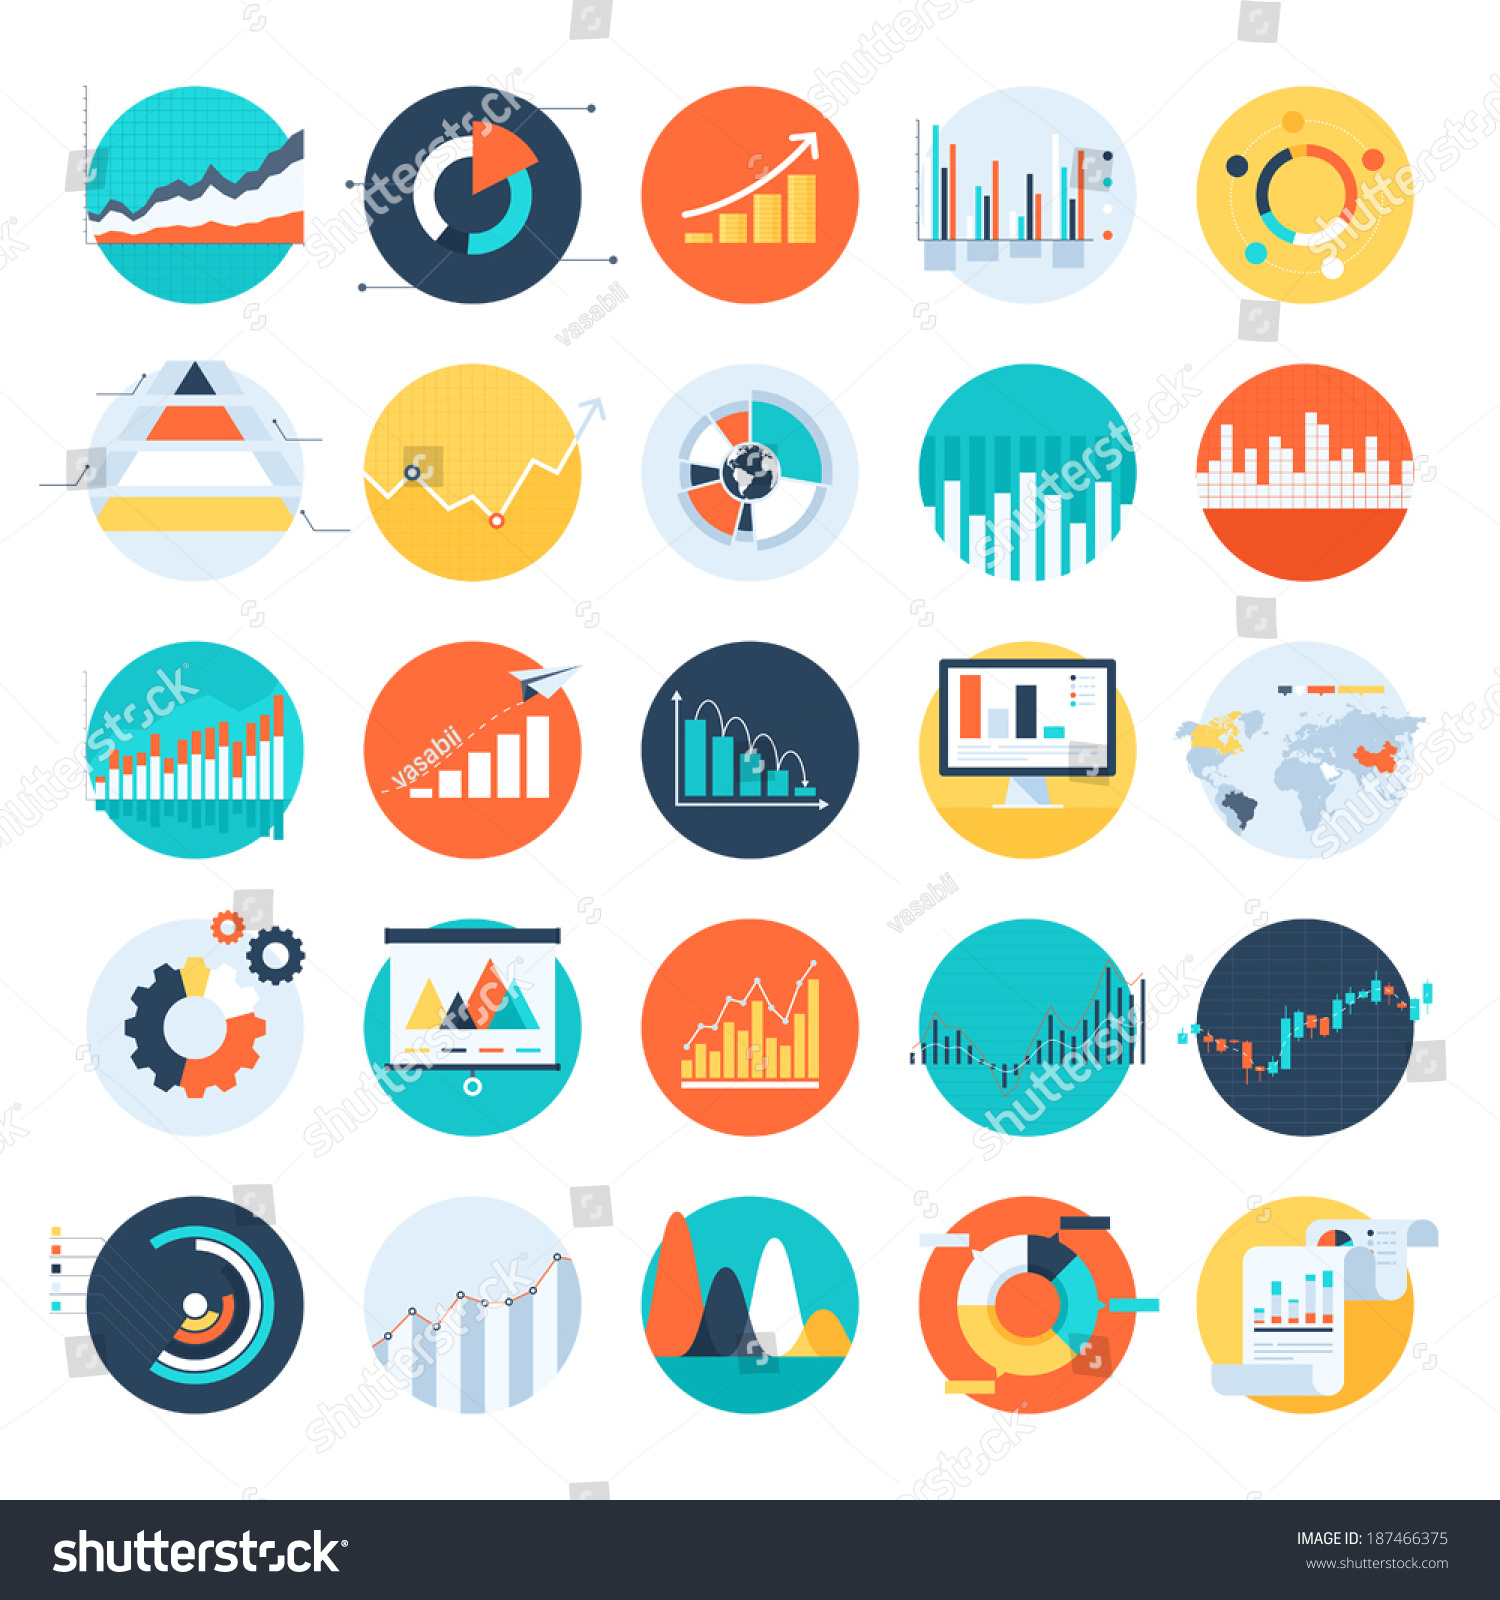 Vector set of flat business chart icons #187466375